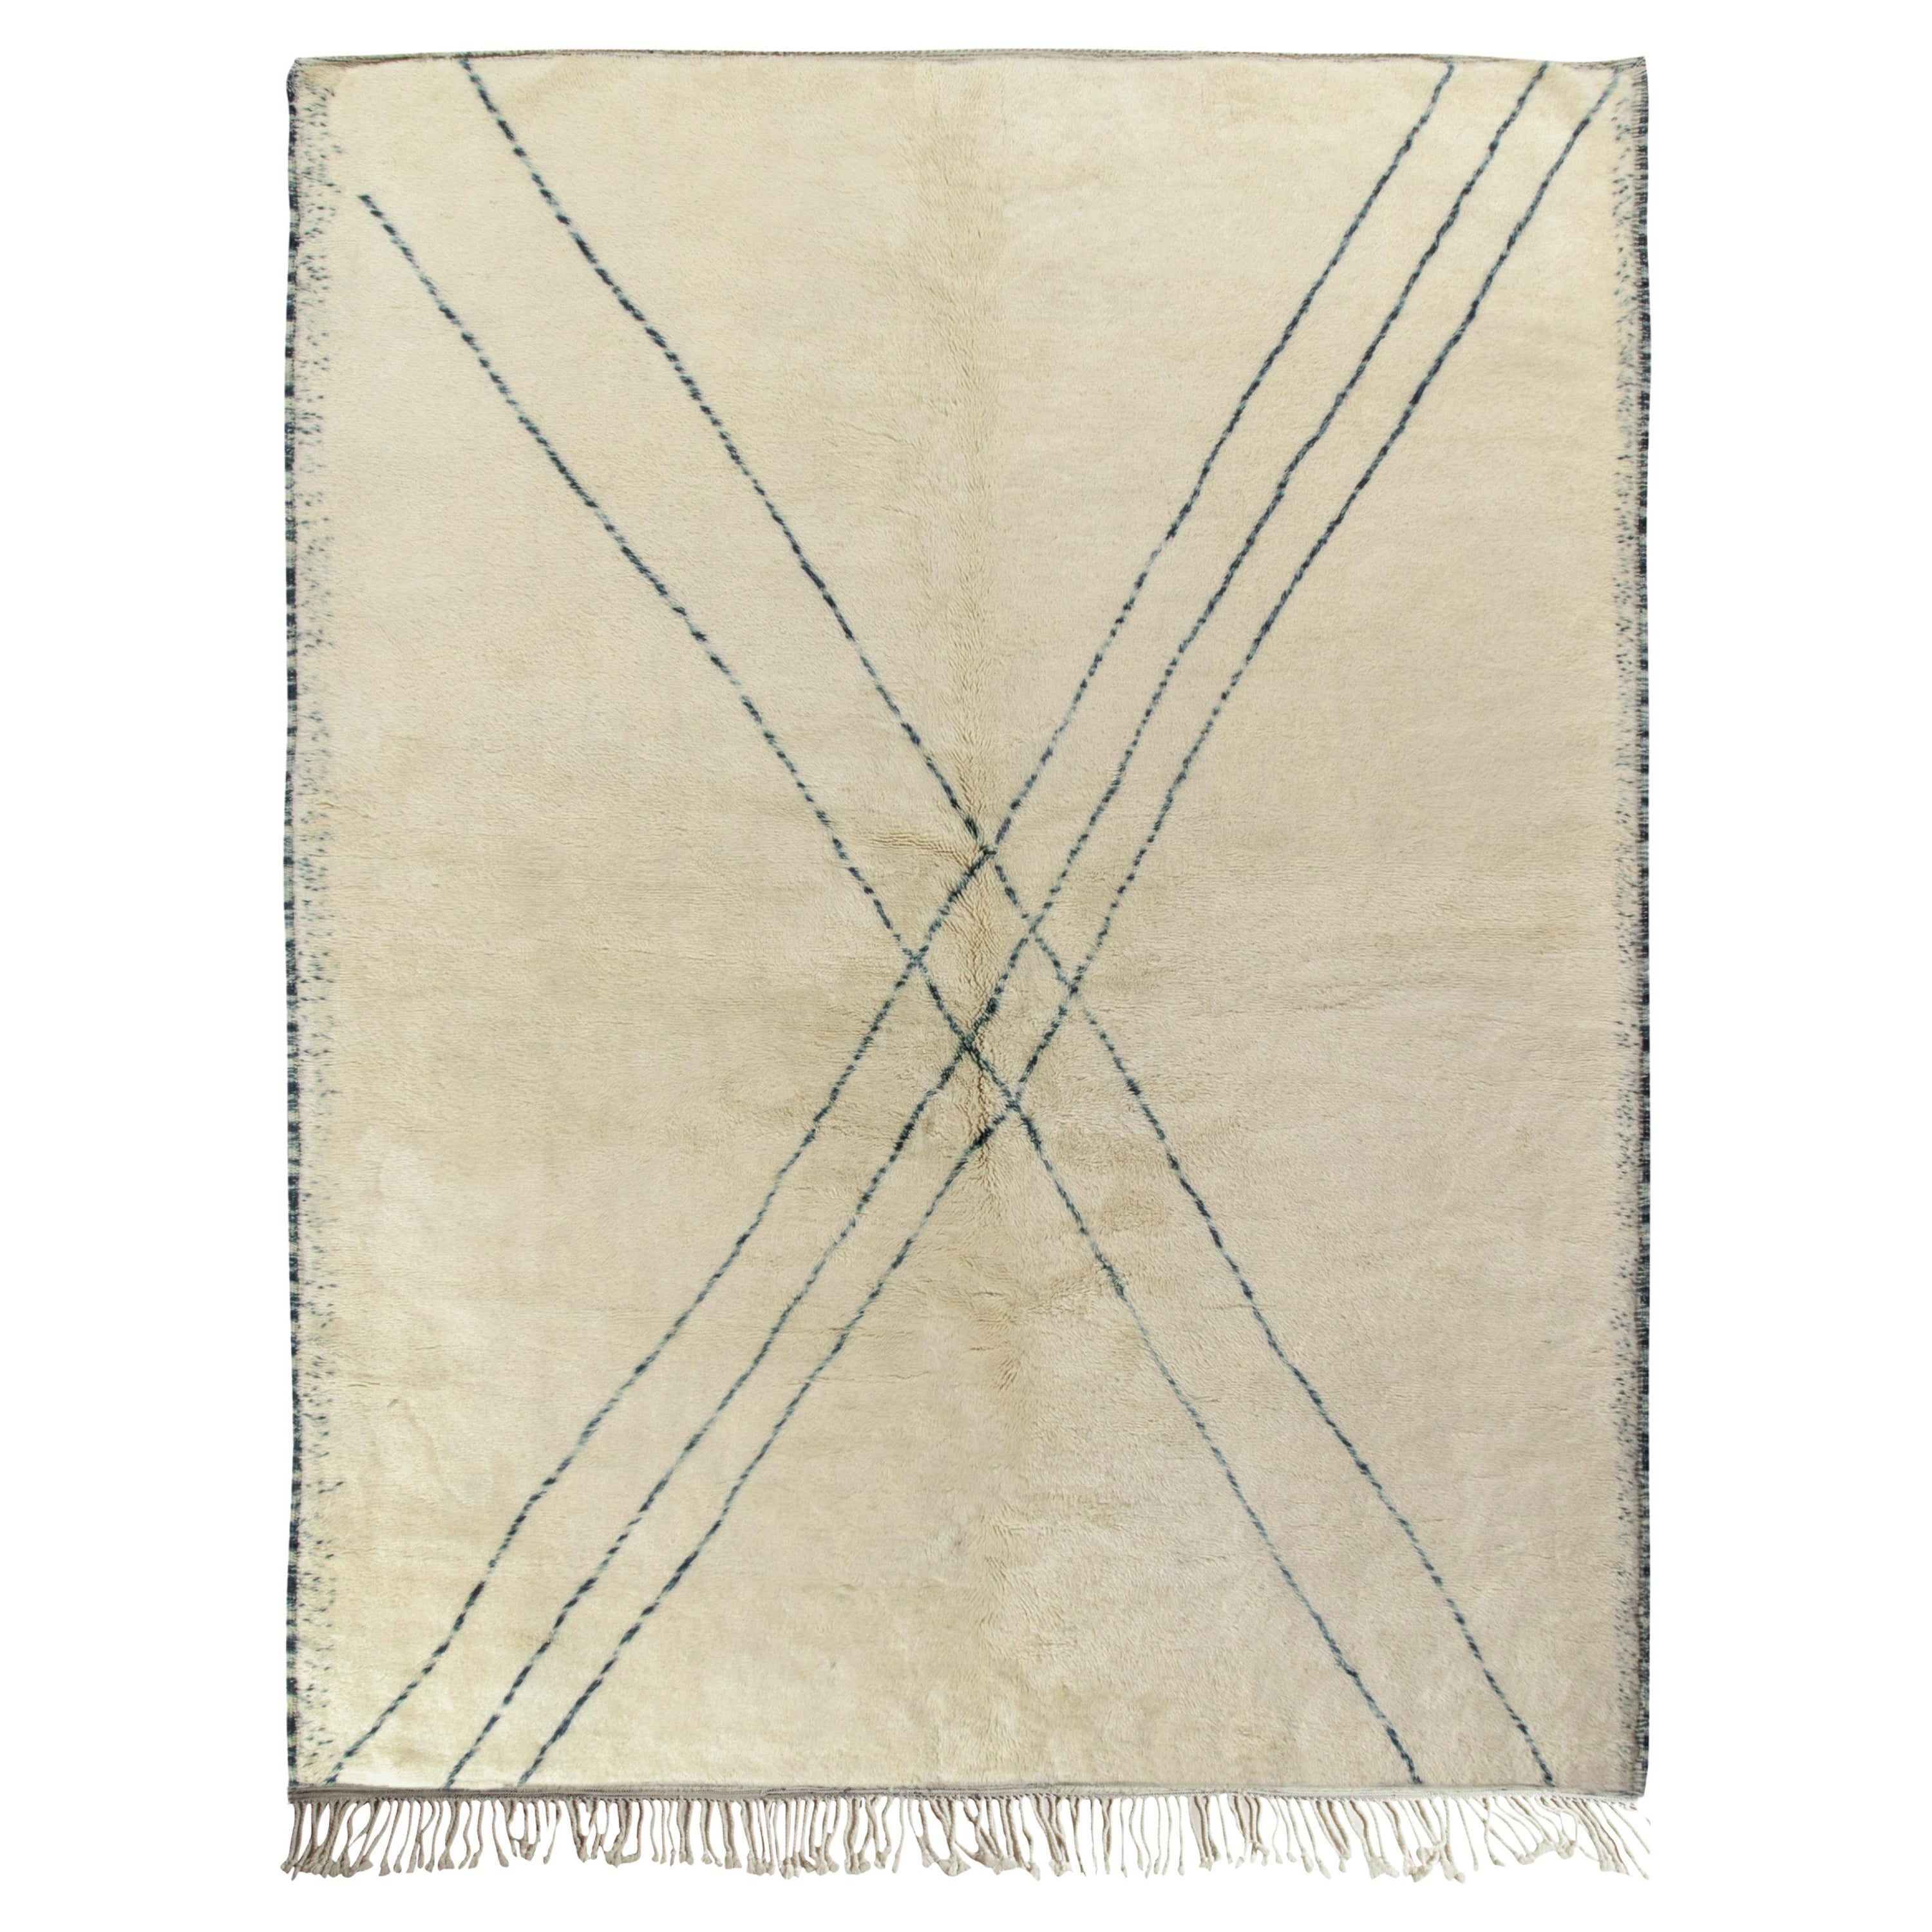 Rug & Kilim’s Contemporary Moroccan Rug in Beige-White, Blue Geometric Pattern For Sale